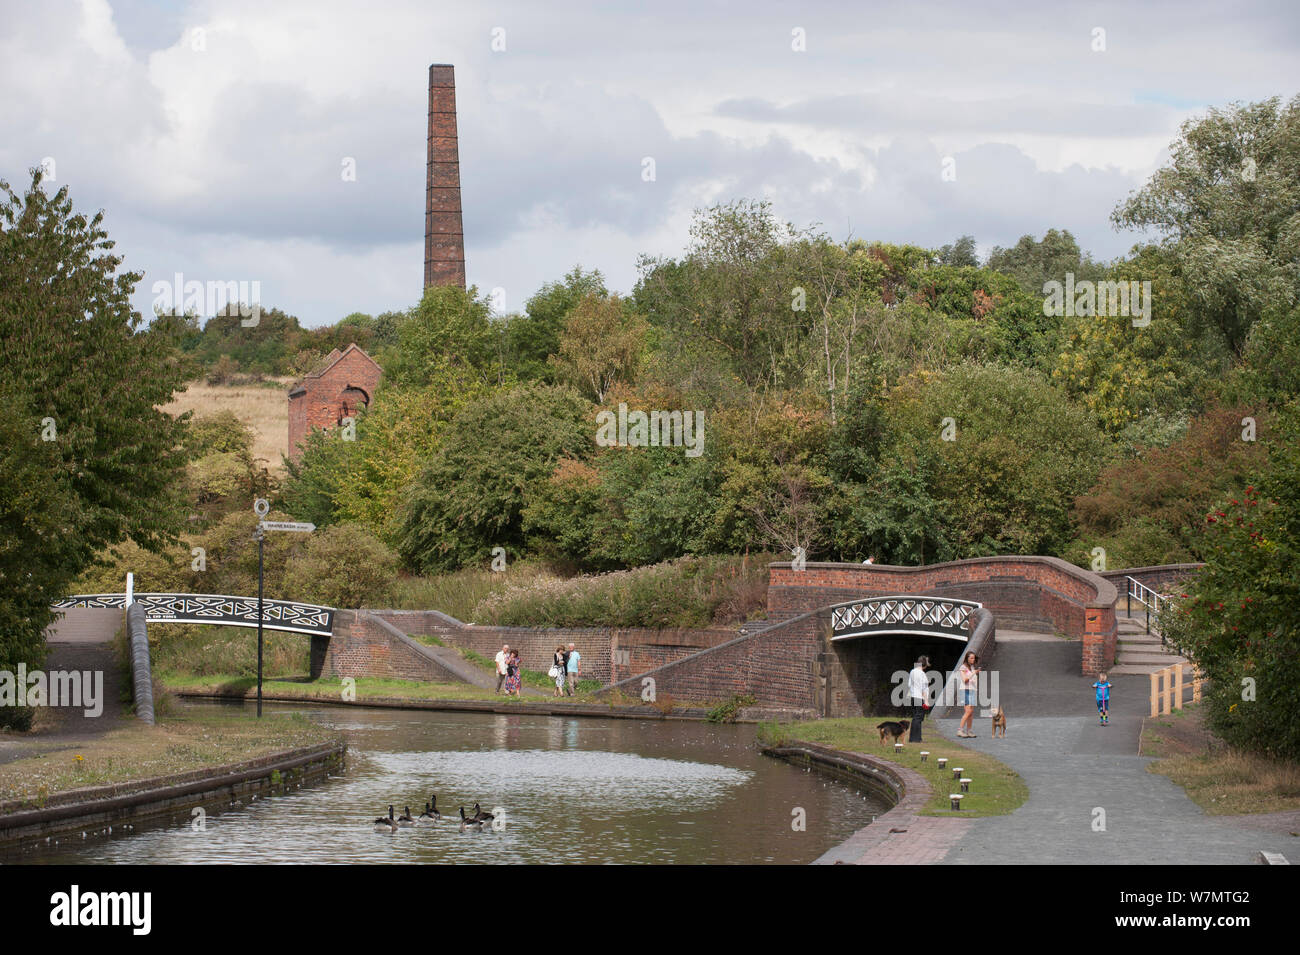 Canals, towpaths and bridges near Bumble Hole Nature Reserve, Sandwell, West Midlands, July 2011 Stock Photo